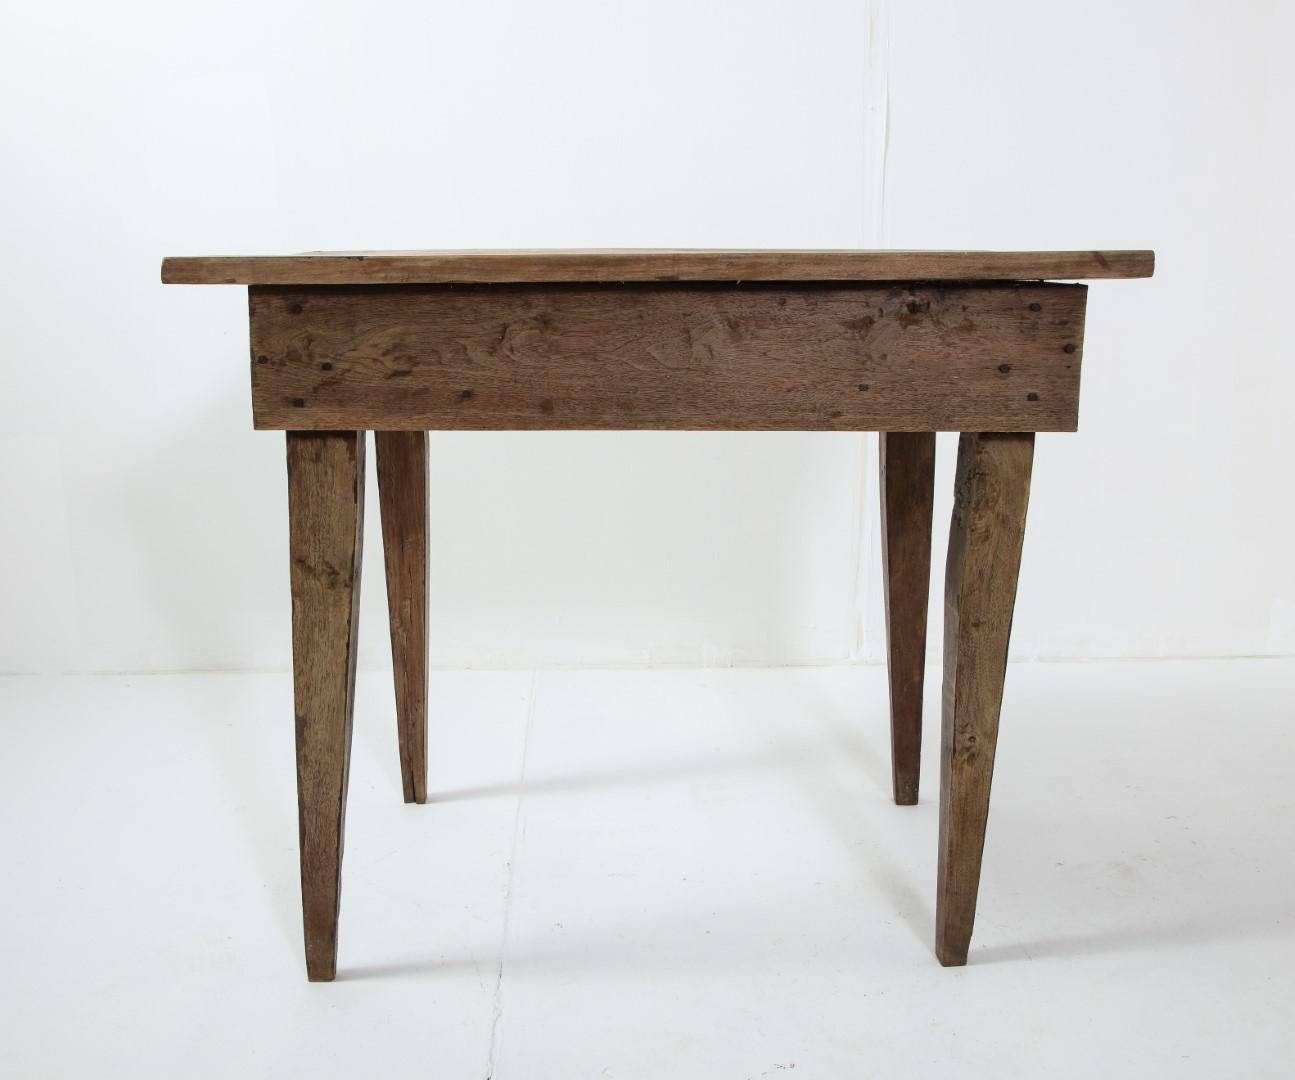 Late 19th century rustic oak side table with drawer and tapered legs. Original cast bronze handle is somewhat loose.